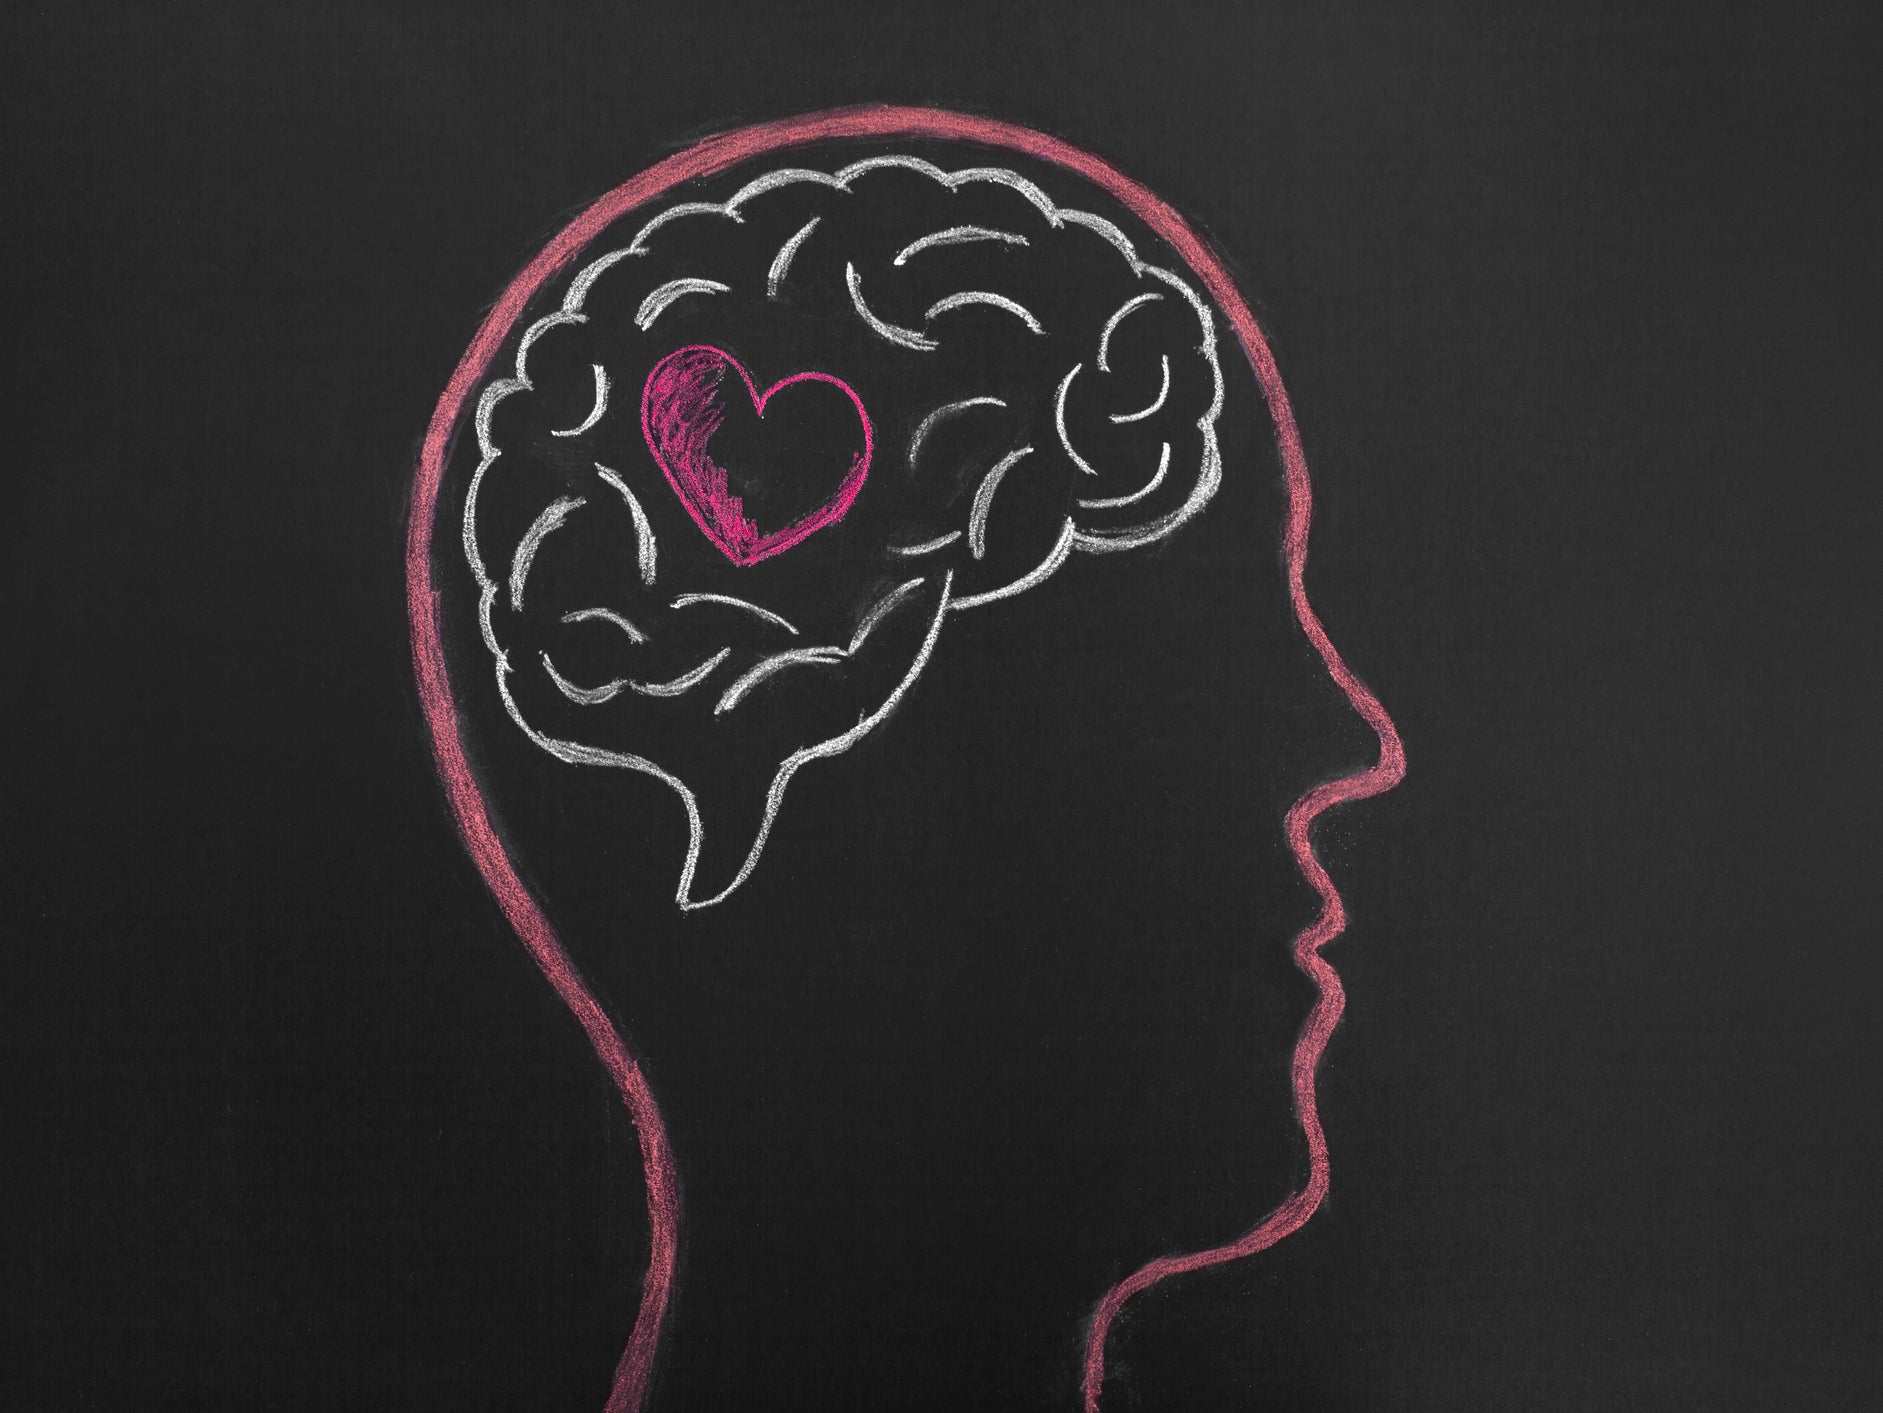 When we fall in love, the brain releases feelgood neurotransmitters that boost our mood